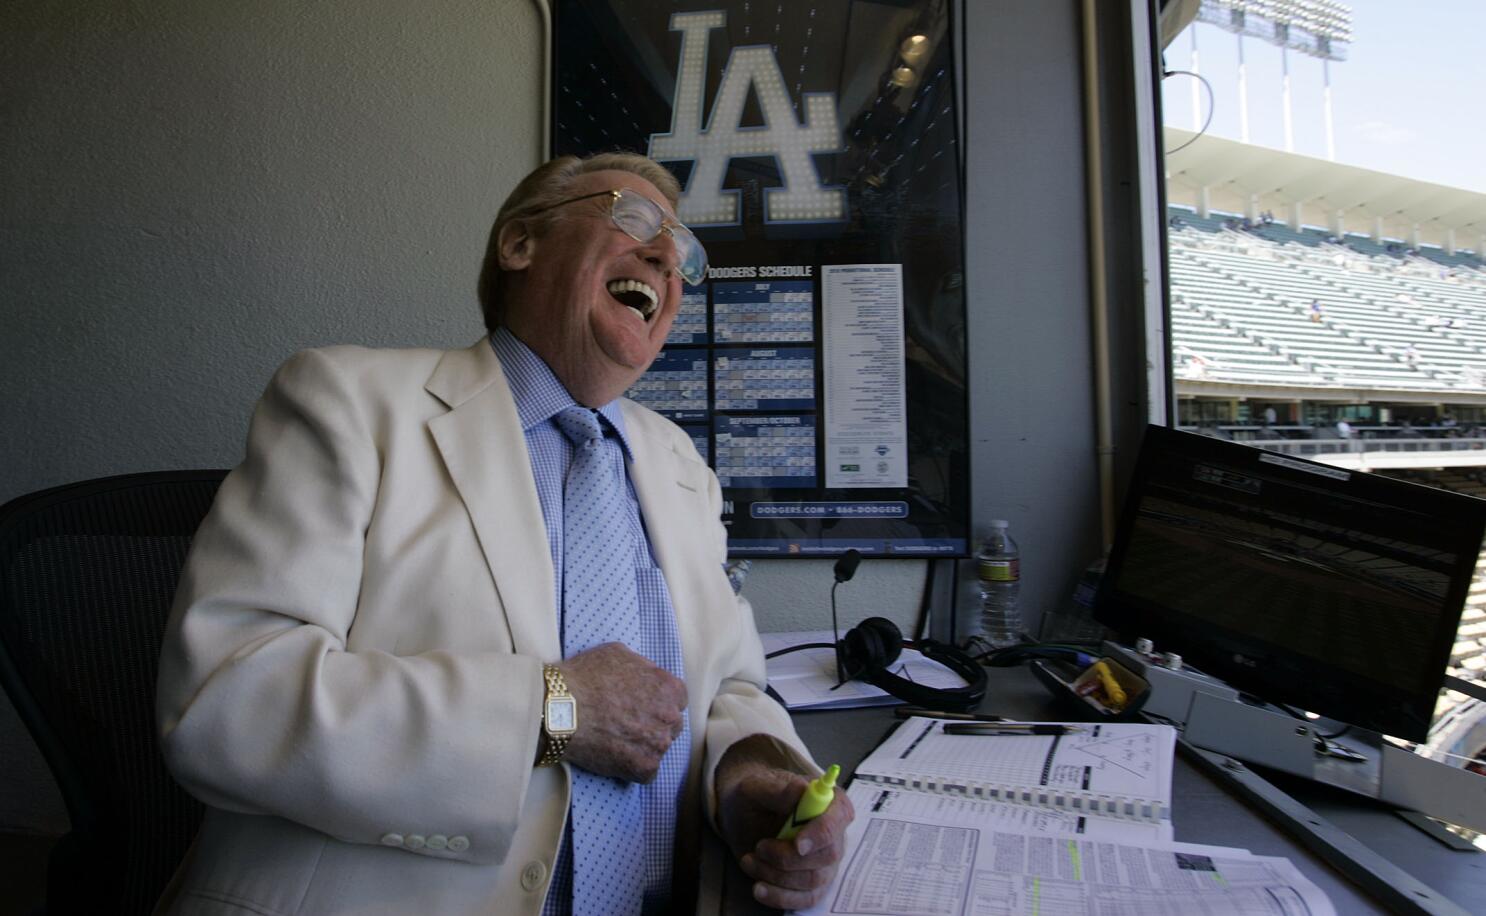 Dodgers Dugout: How a Vin Scully comment led to Shawn Green giving